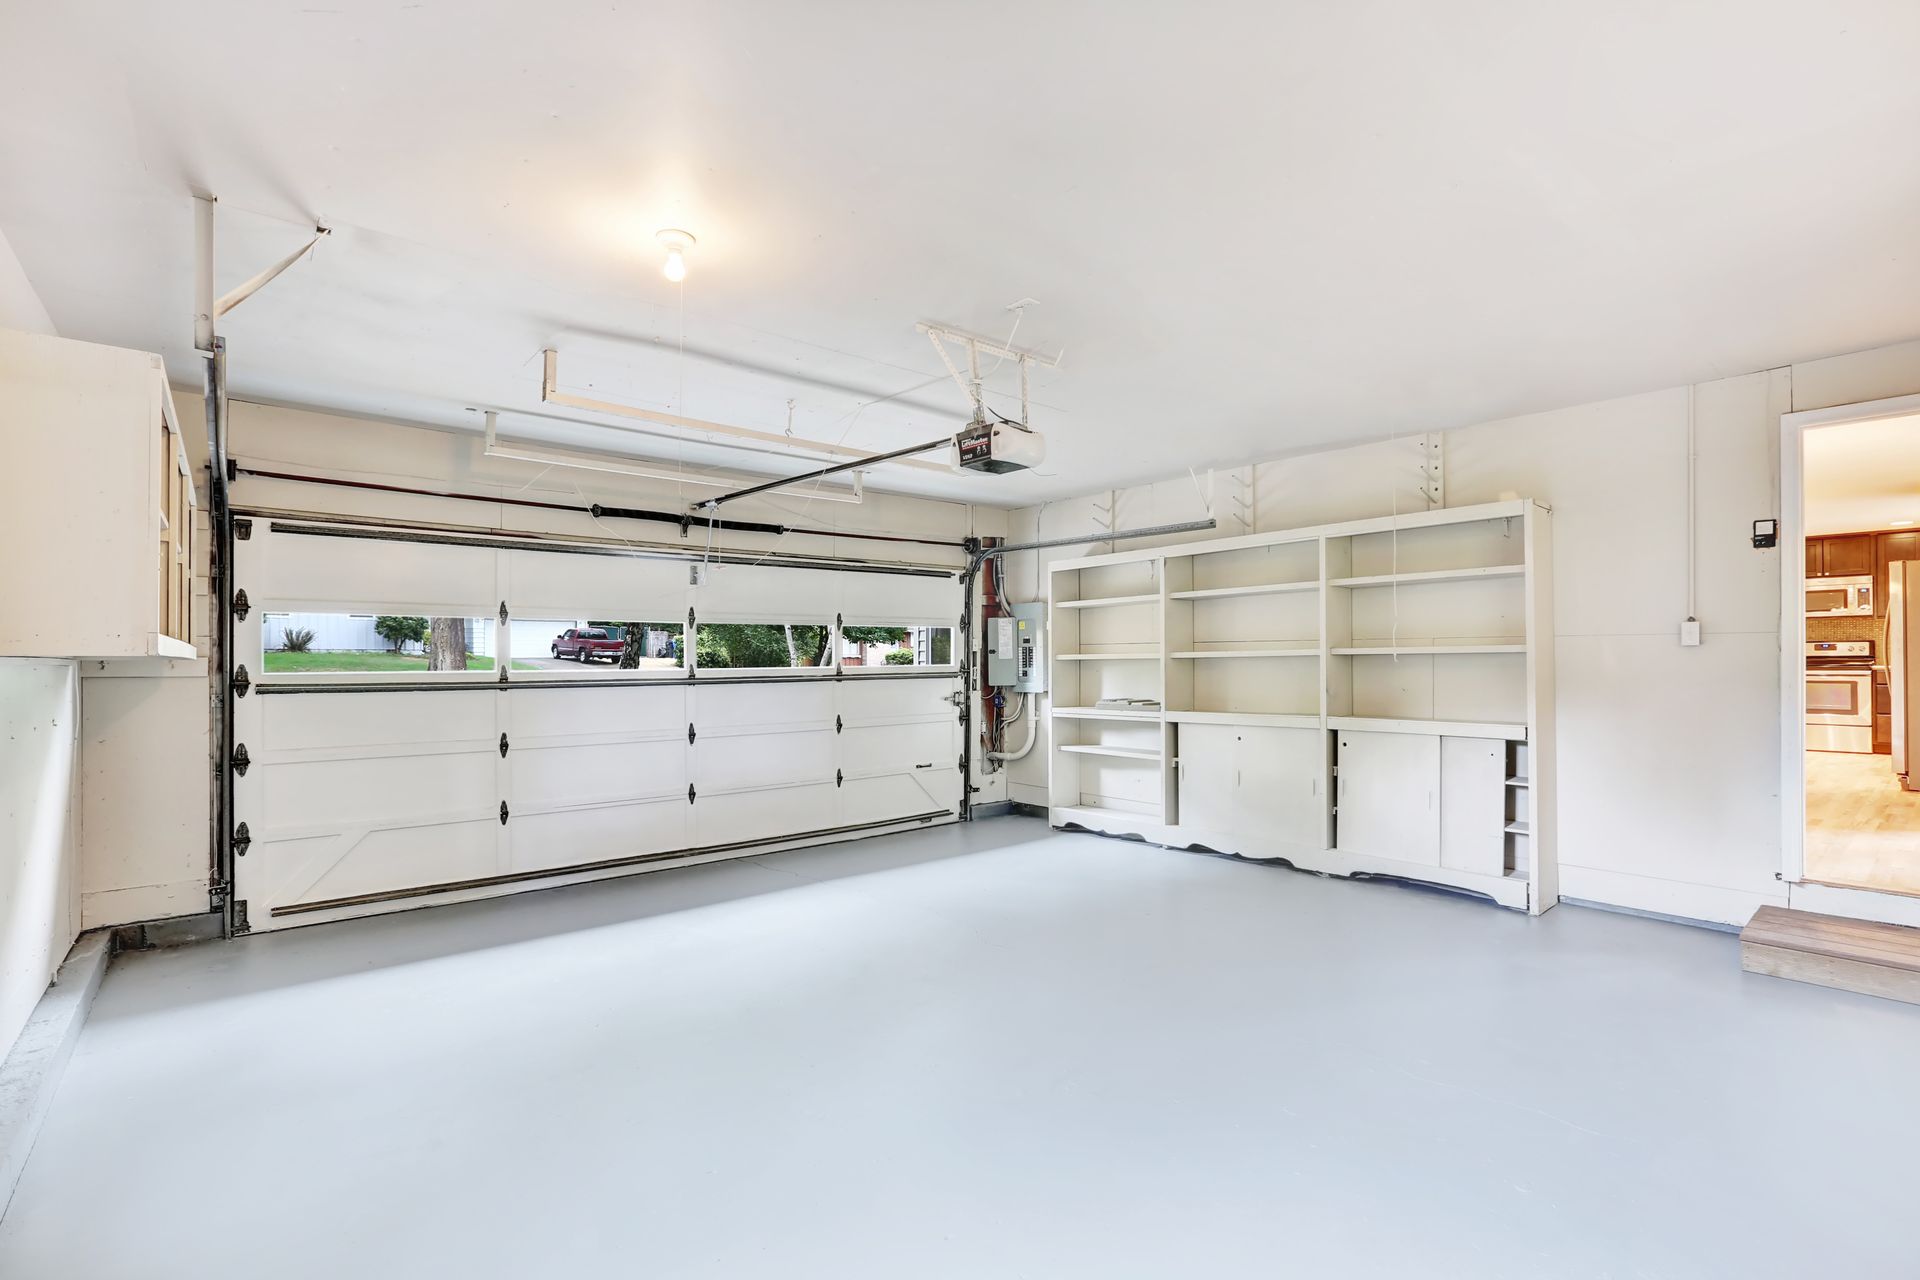 Spacious, well-lit garage interior in an American house with no vehicles or clutter, ready for storage or use.